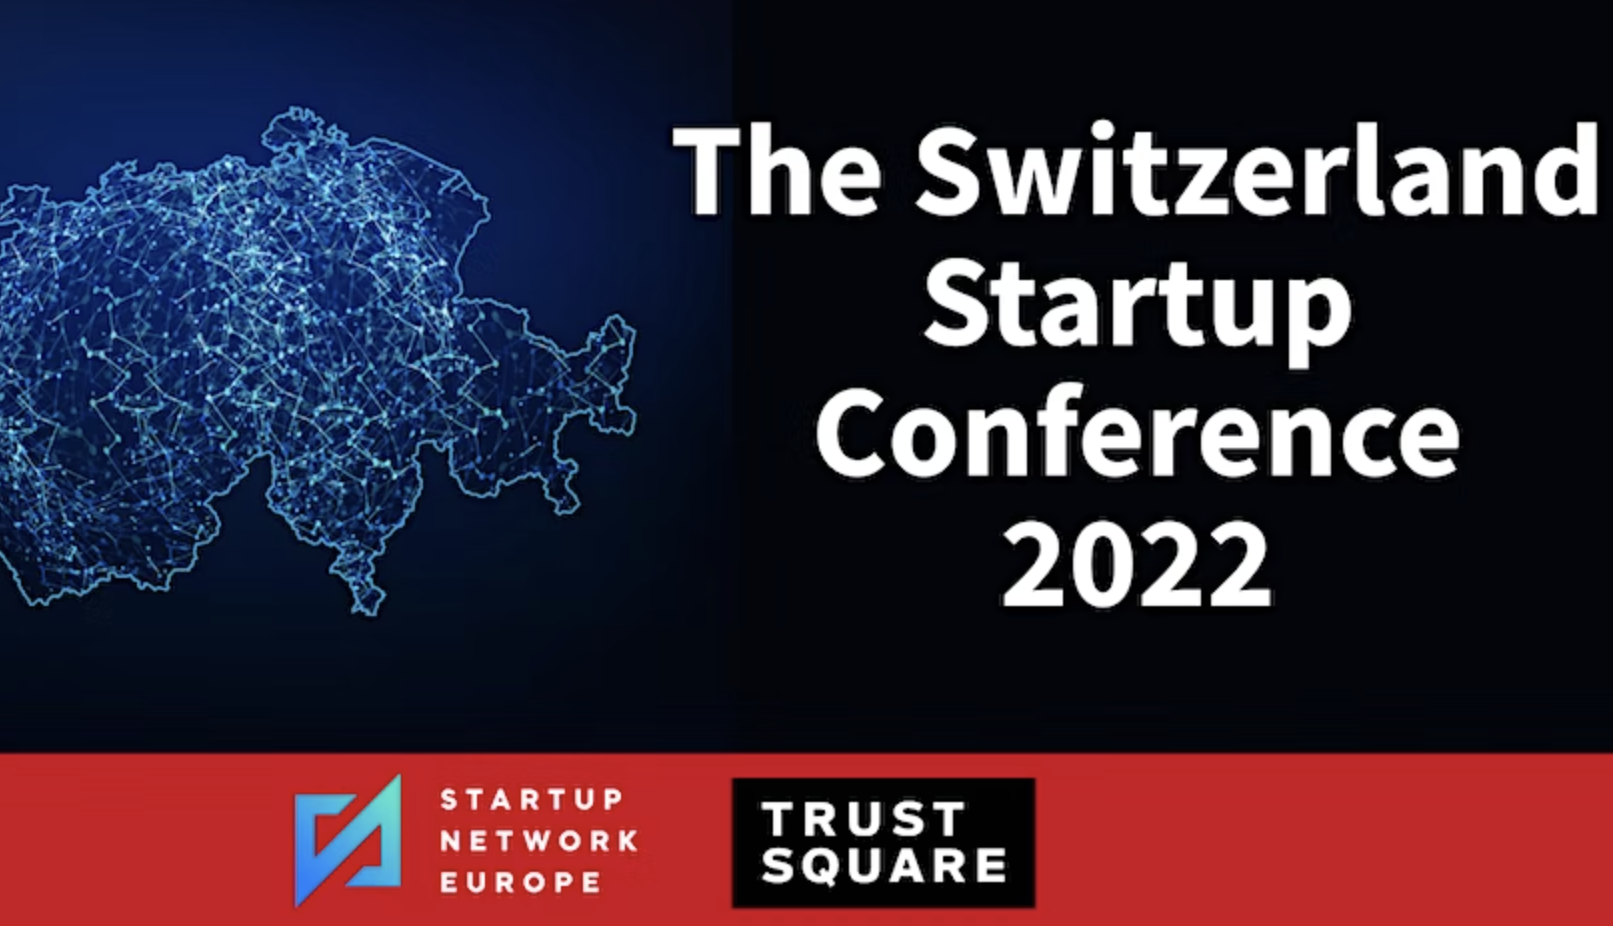 The Switzerland Startup Conference 2022